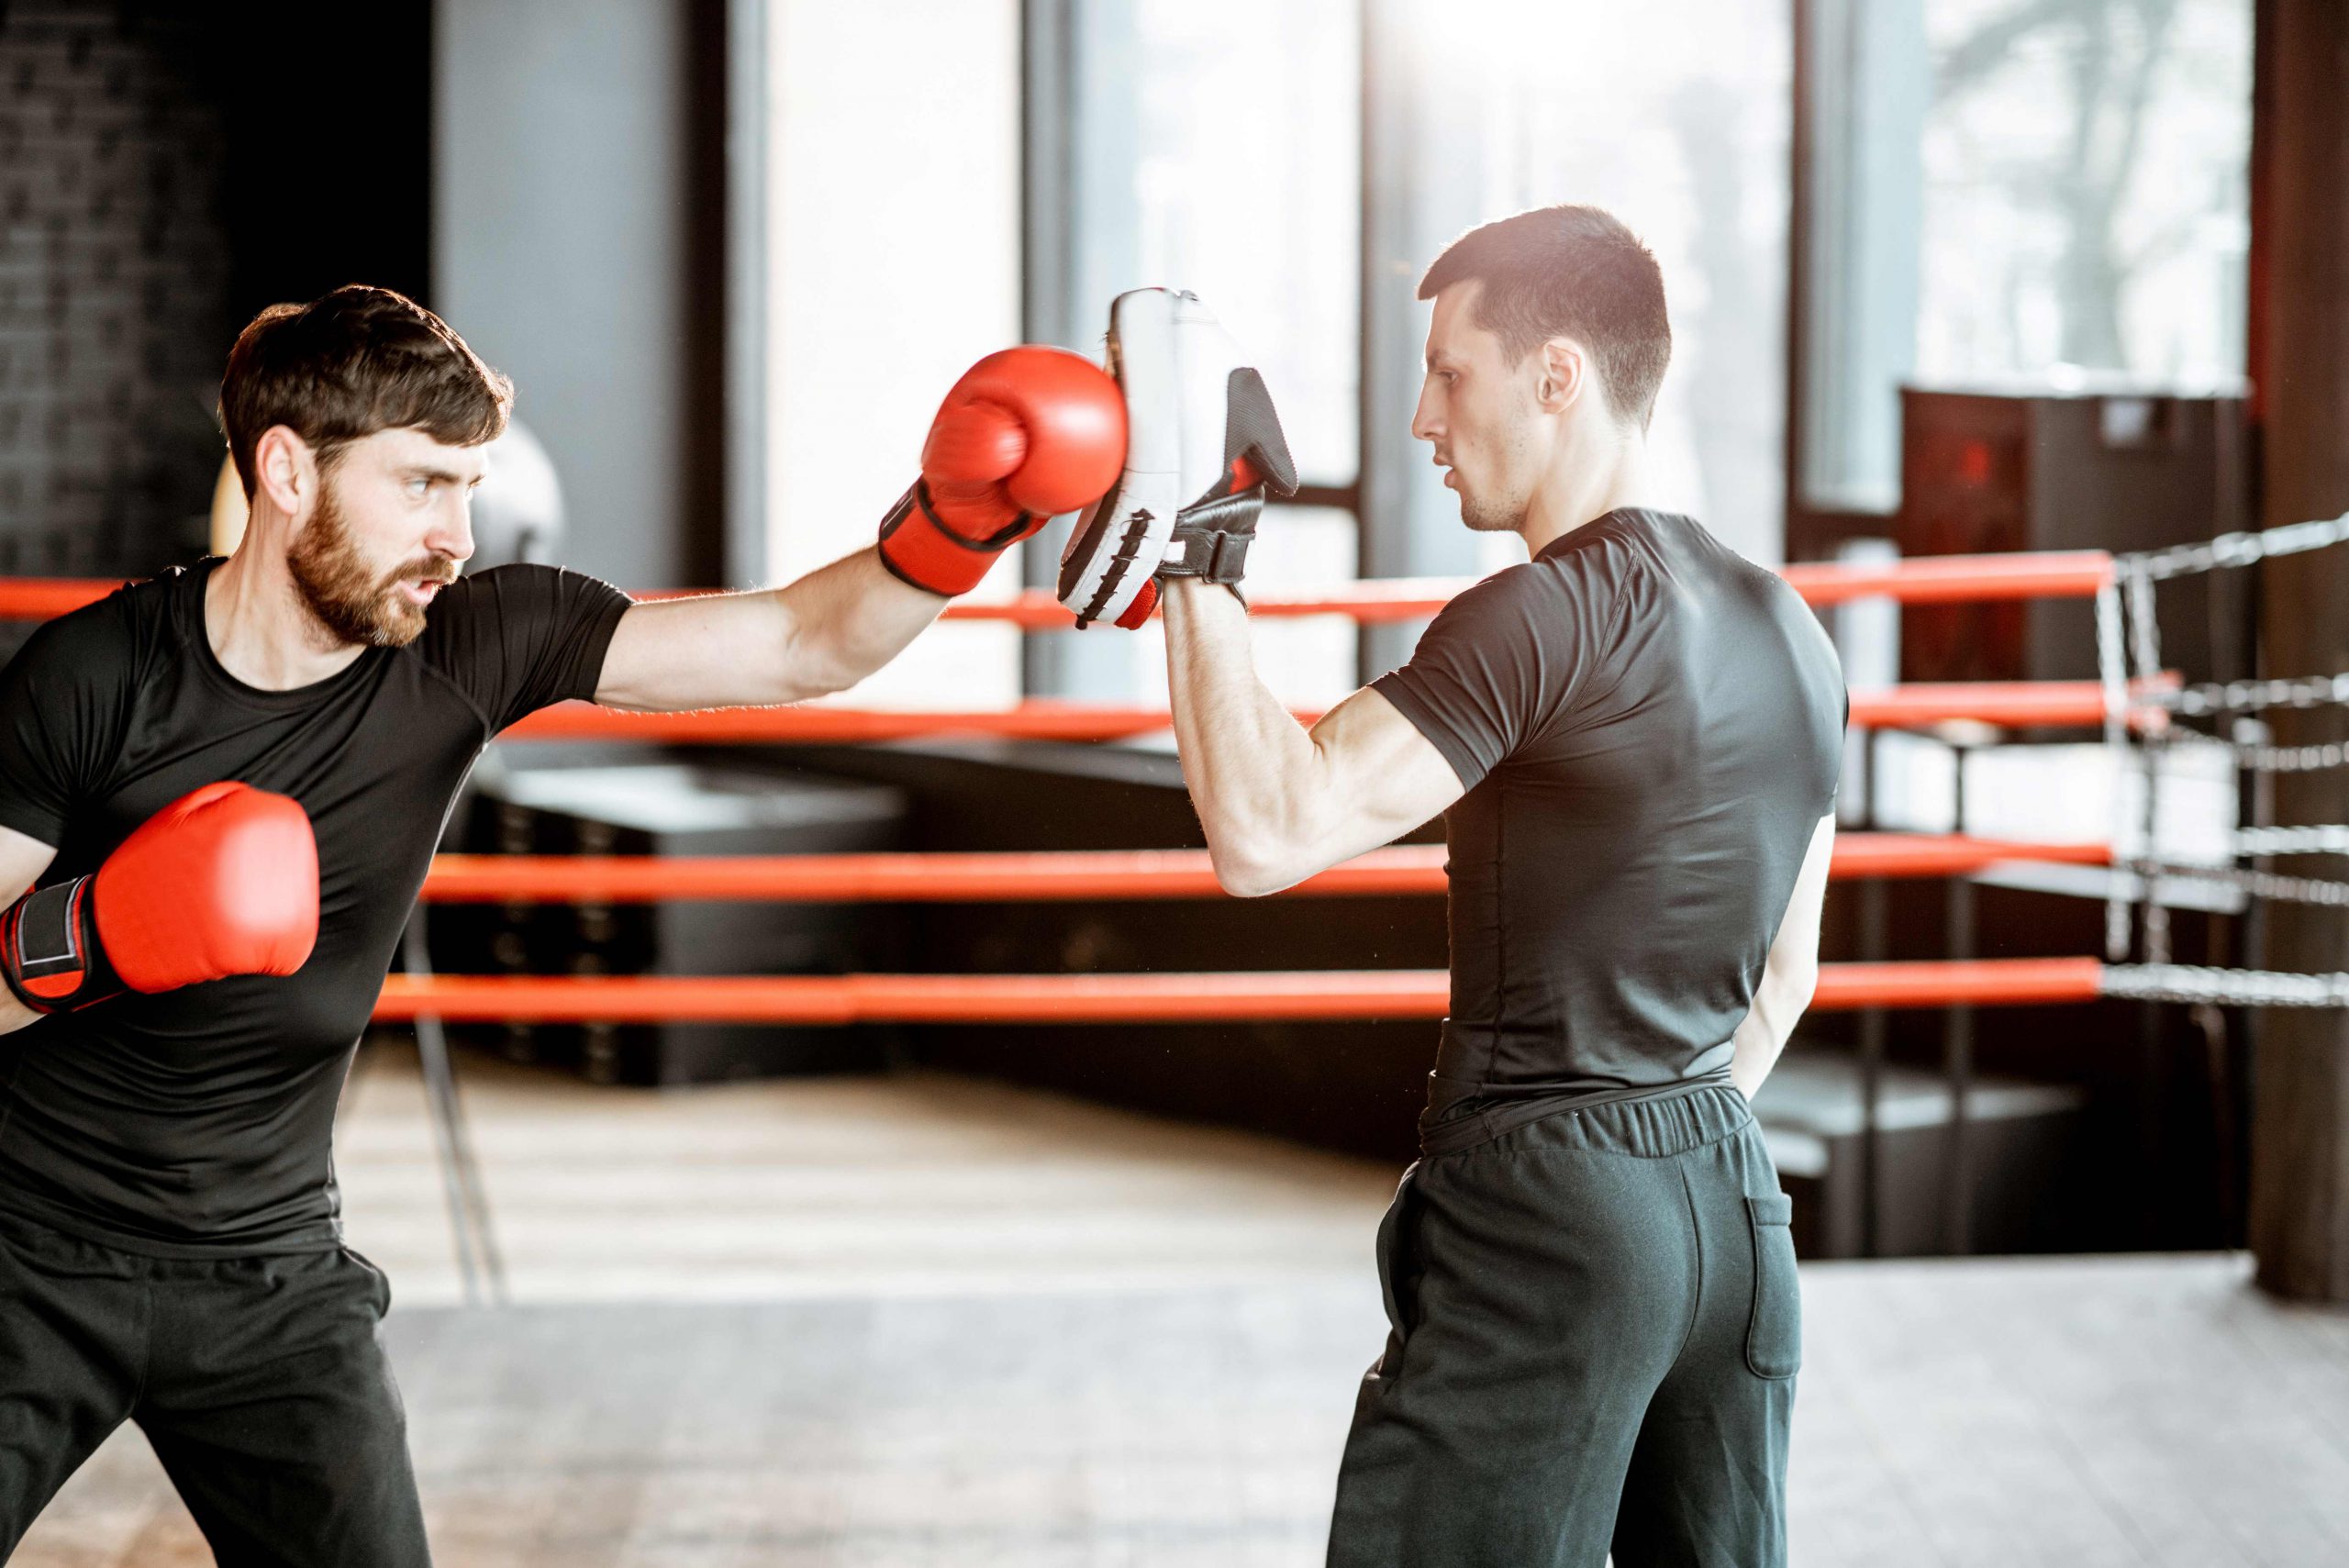 Athletic man training with boxing trainer in the boxing ring at the gym